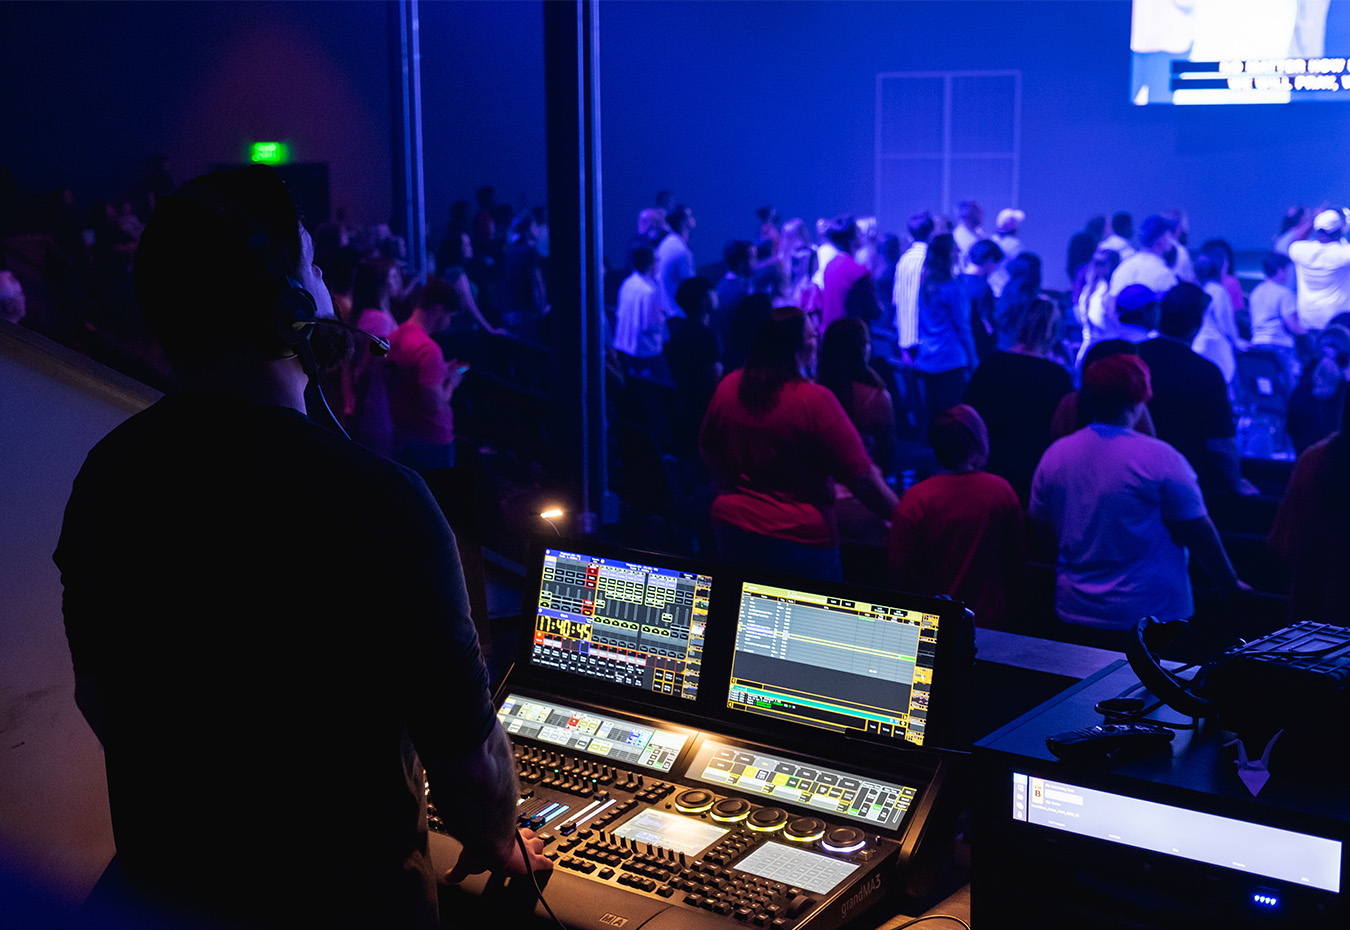 Concert venue outfitted with audio, video and lighting from CTS AVL